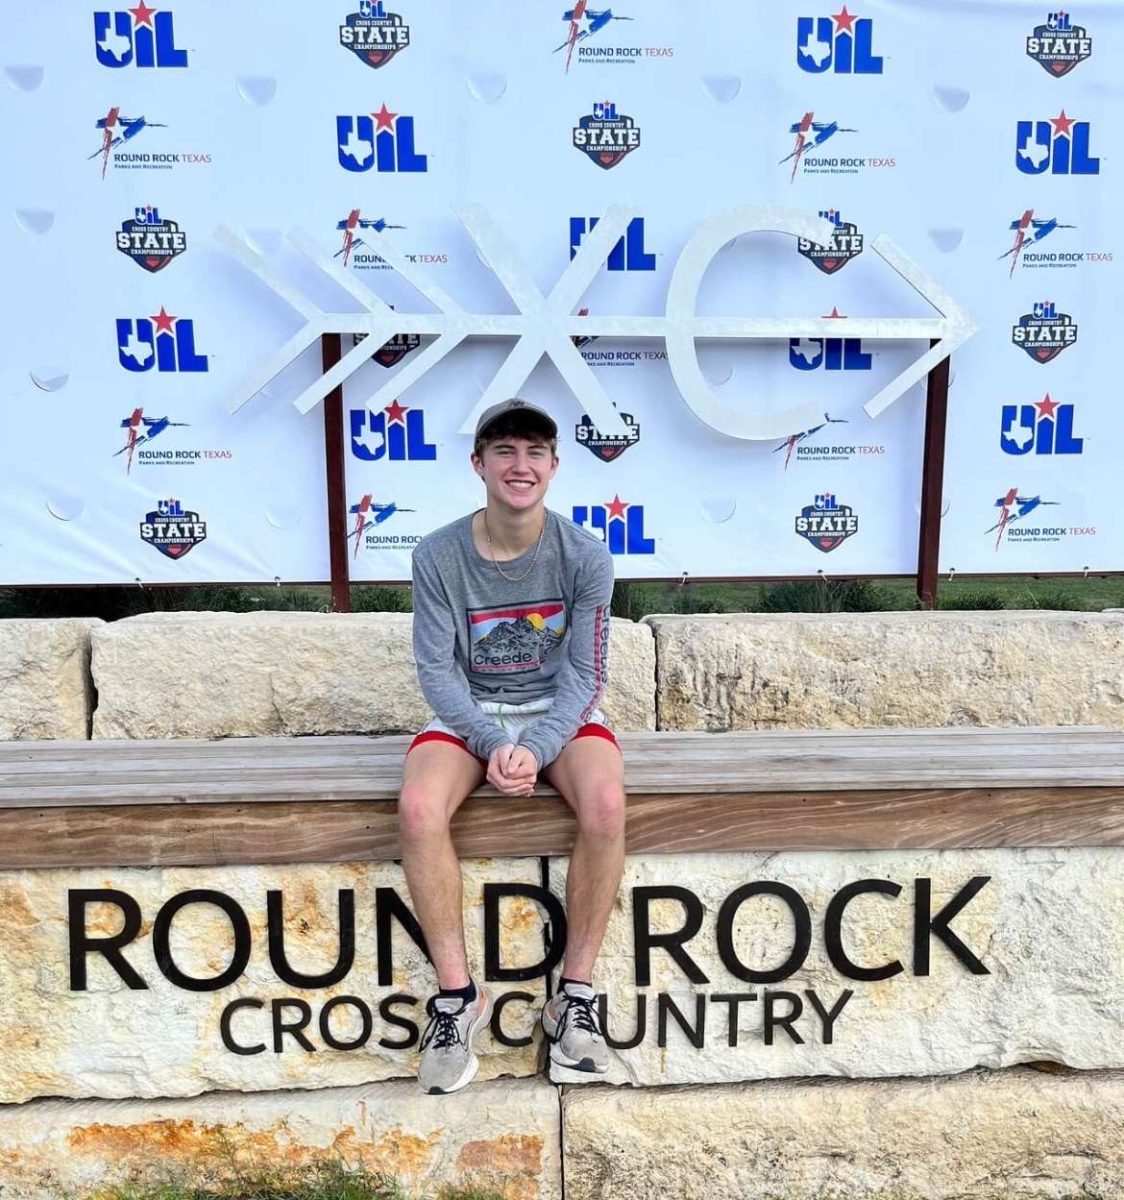 Dax Allen at the state cross country meet